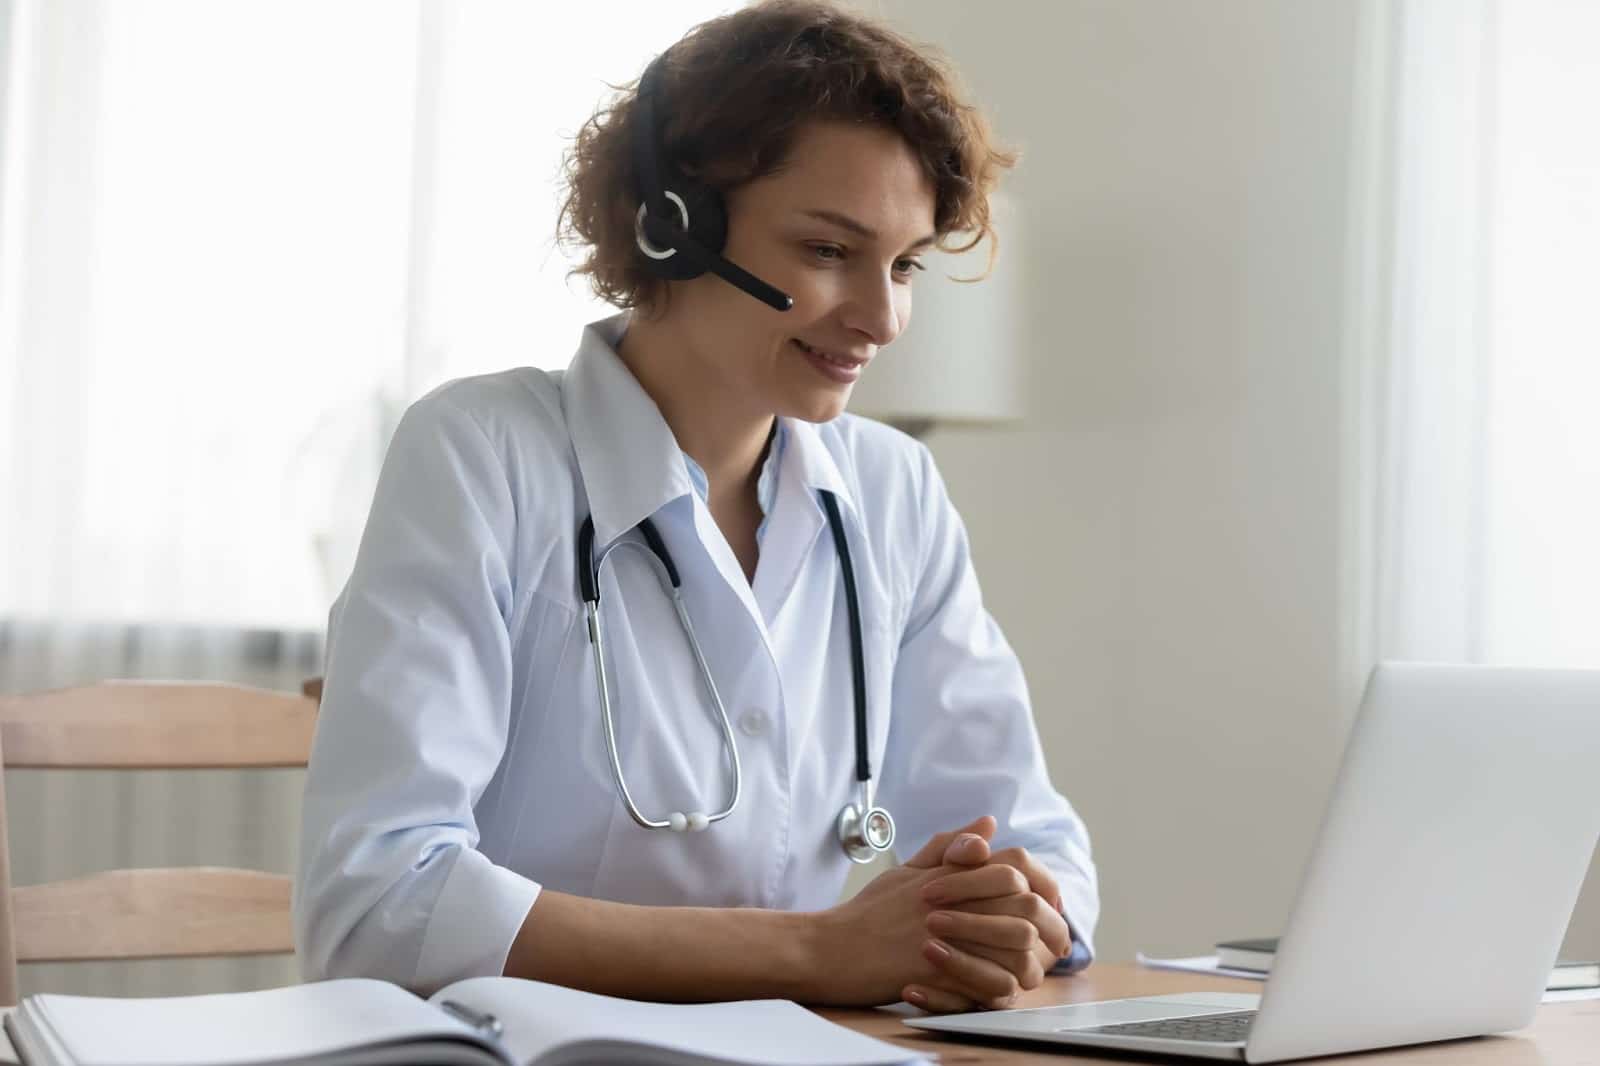 Physician wearing headset sitting at desk with laptop